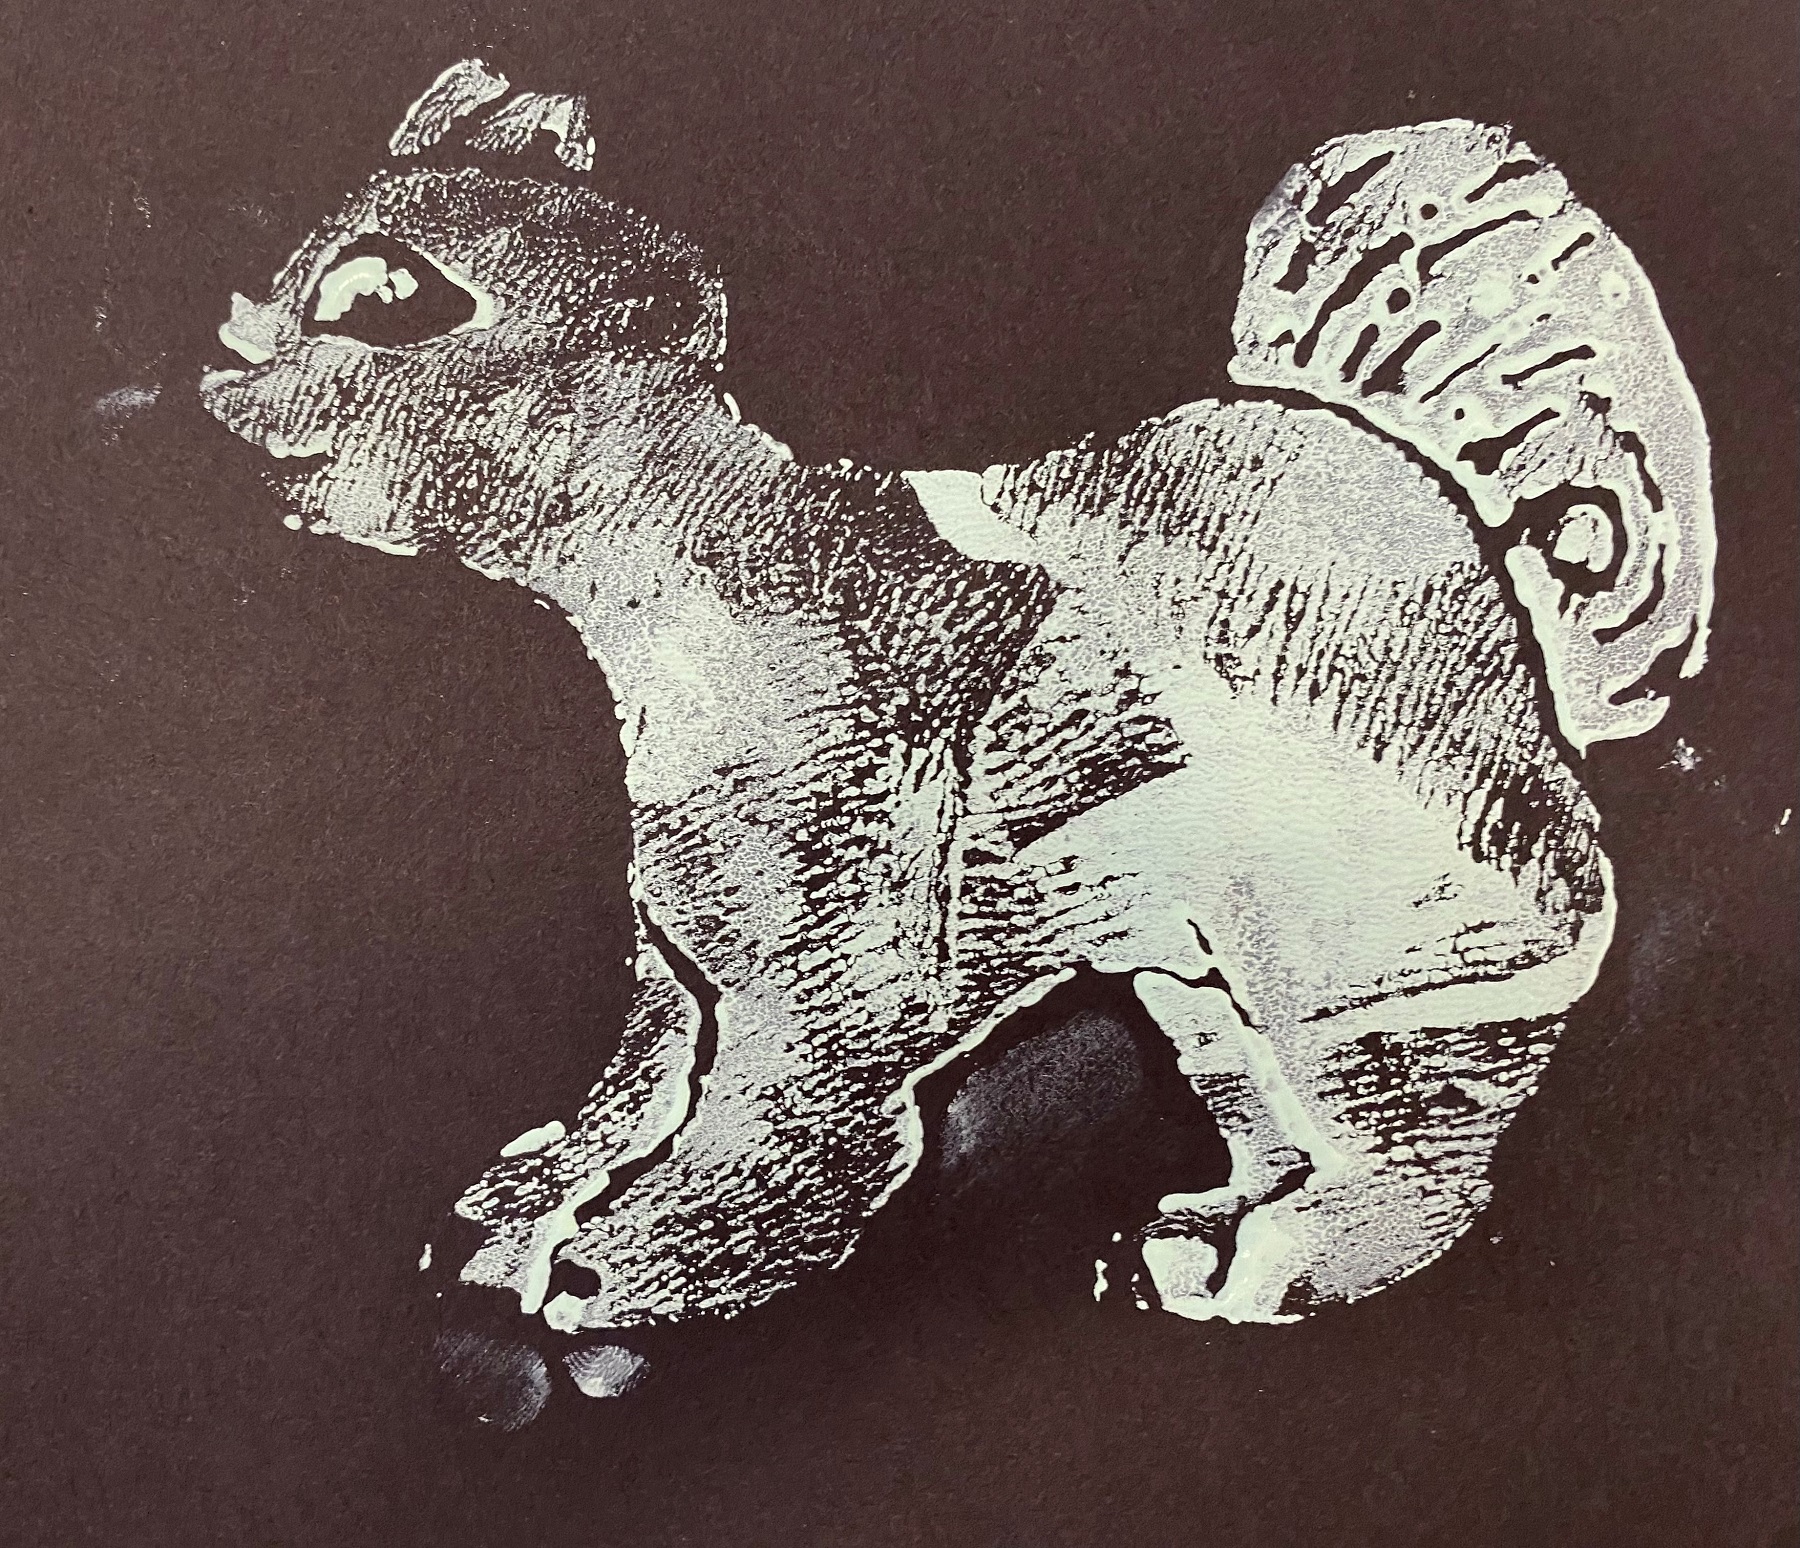 A print of a grey squirrel created by an Endhaven Elementary School student. 